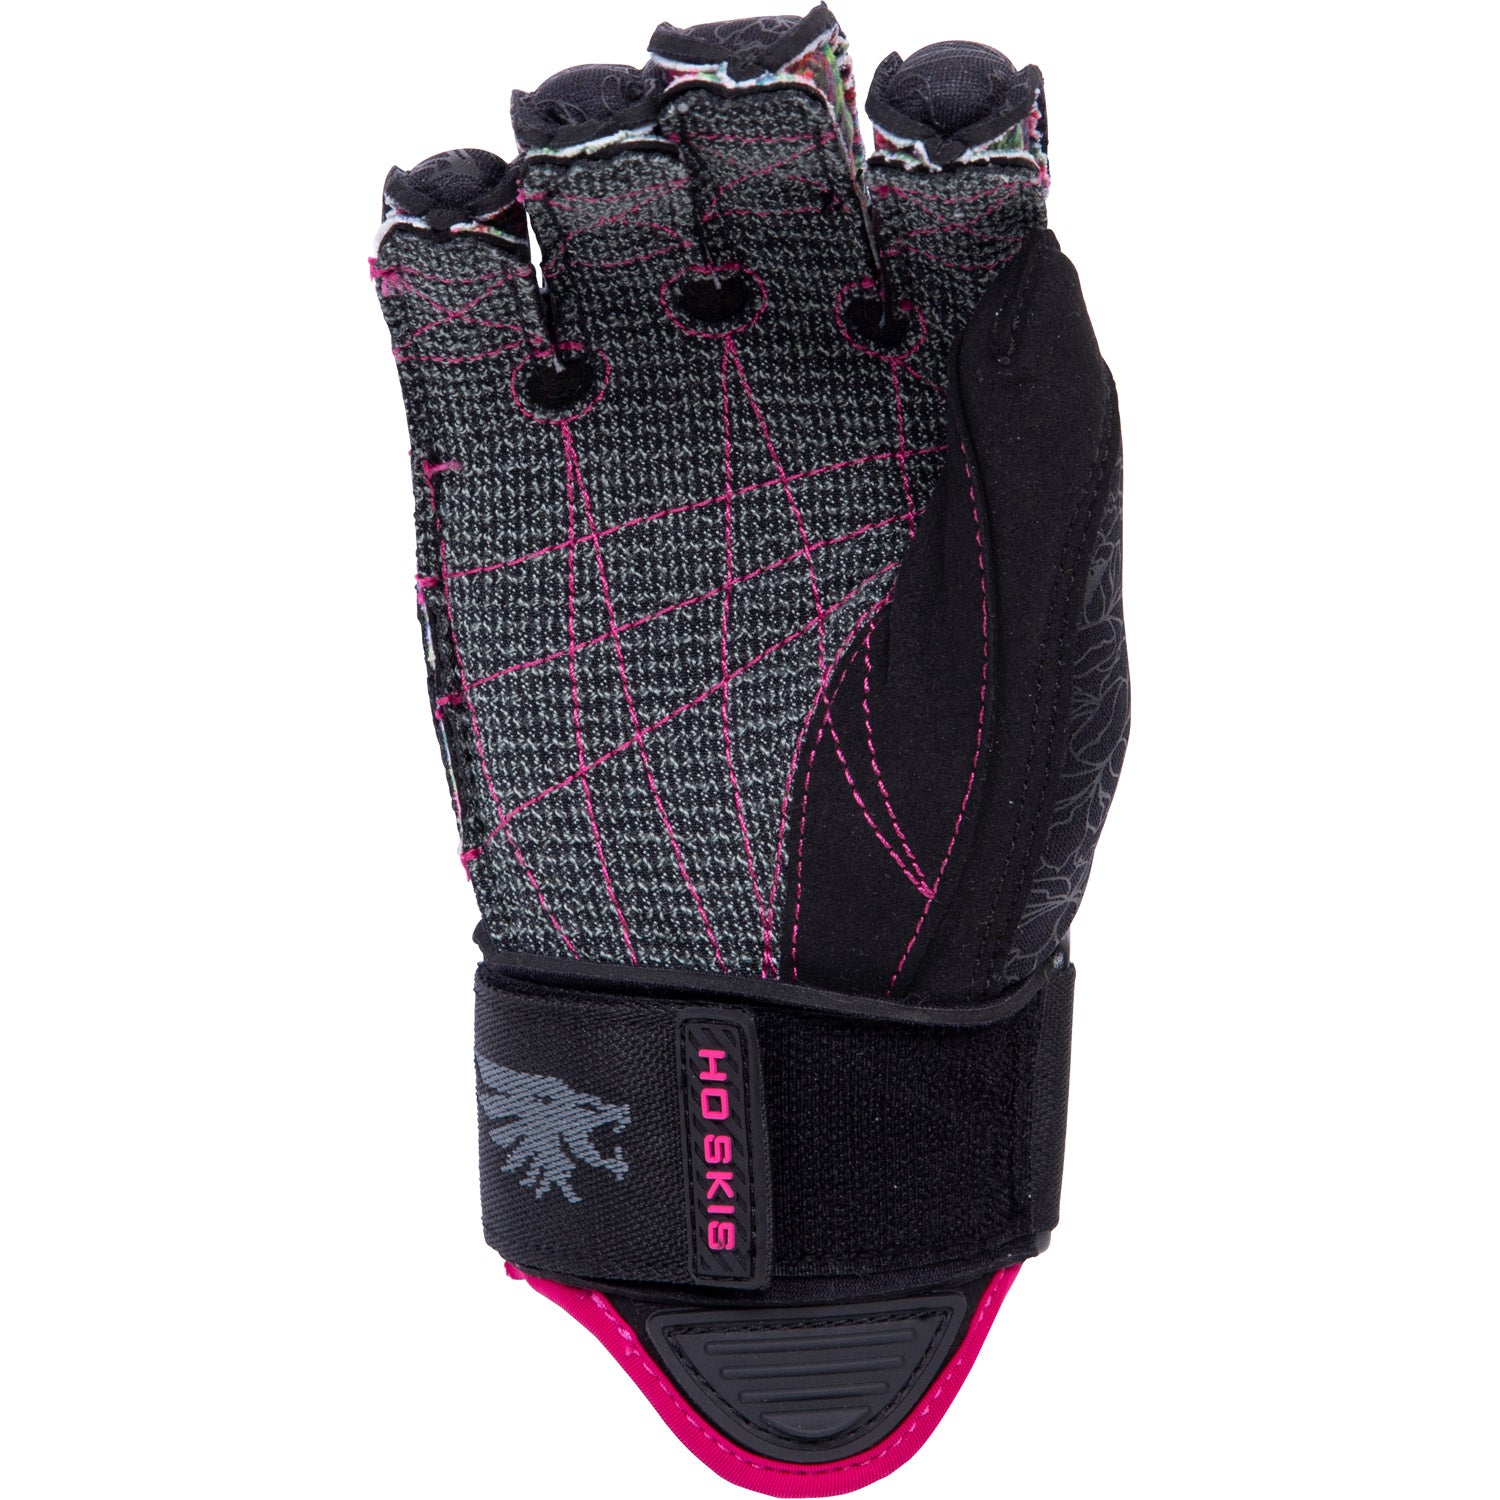 Syndicate Angel Inside Out Glove 